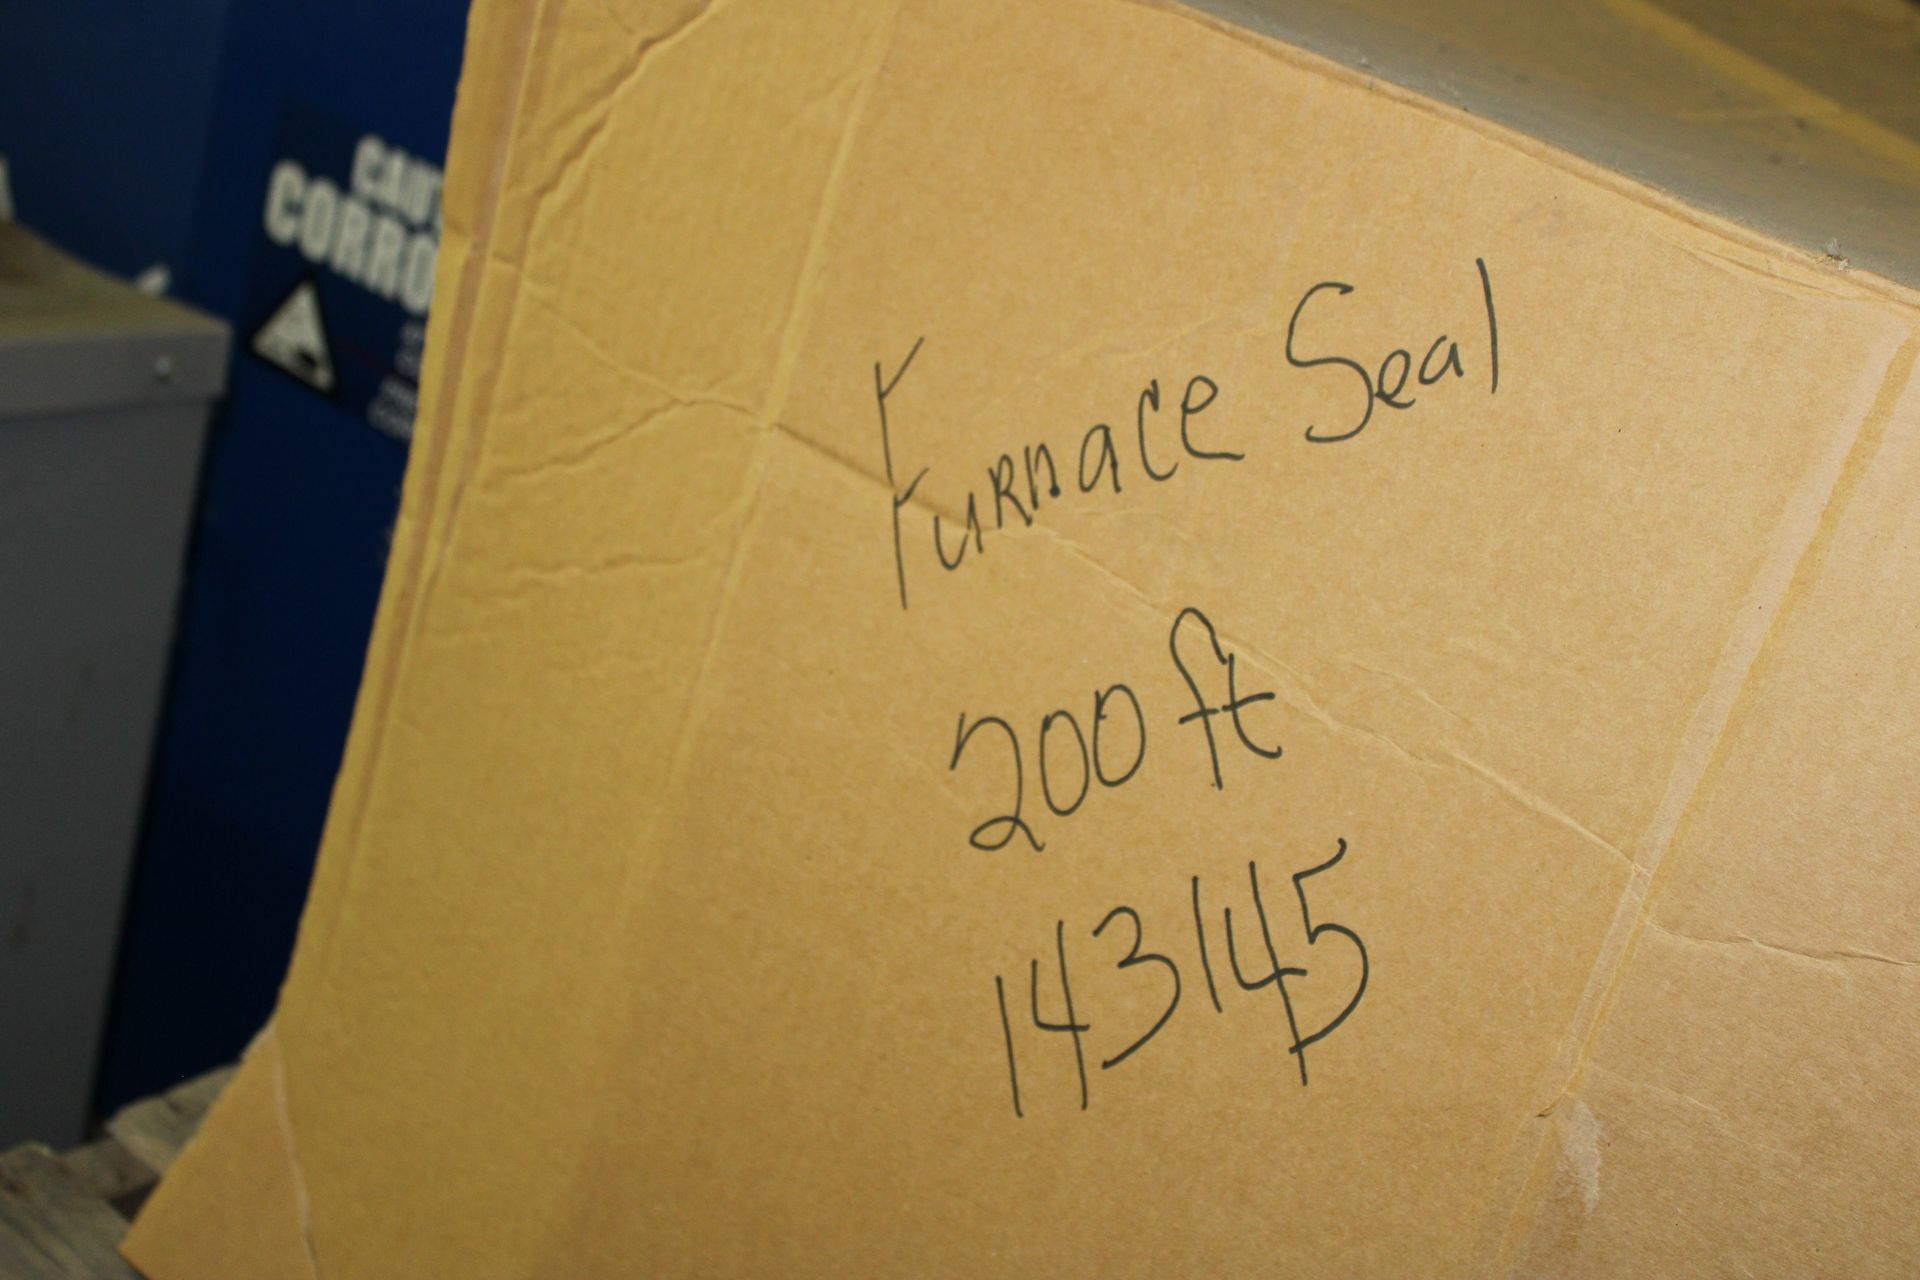 Contents of (2) Pallets: Furnace Seals